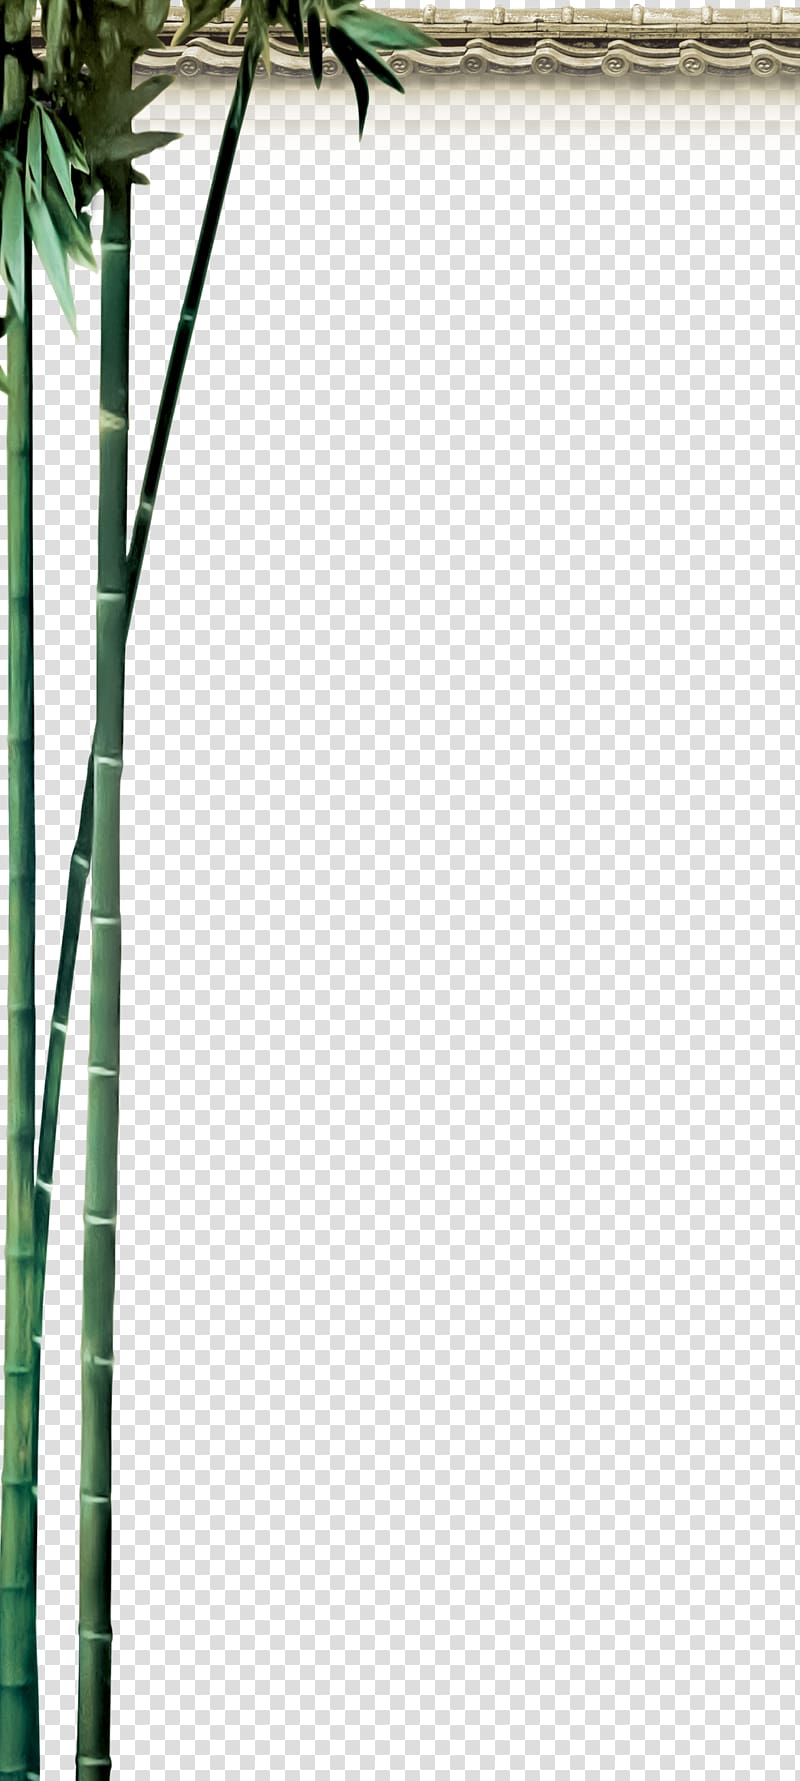 Bamboo Classical element Pattern, Bamboo classical elements transparent background PNG clipart